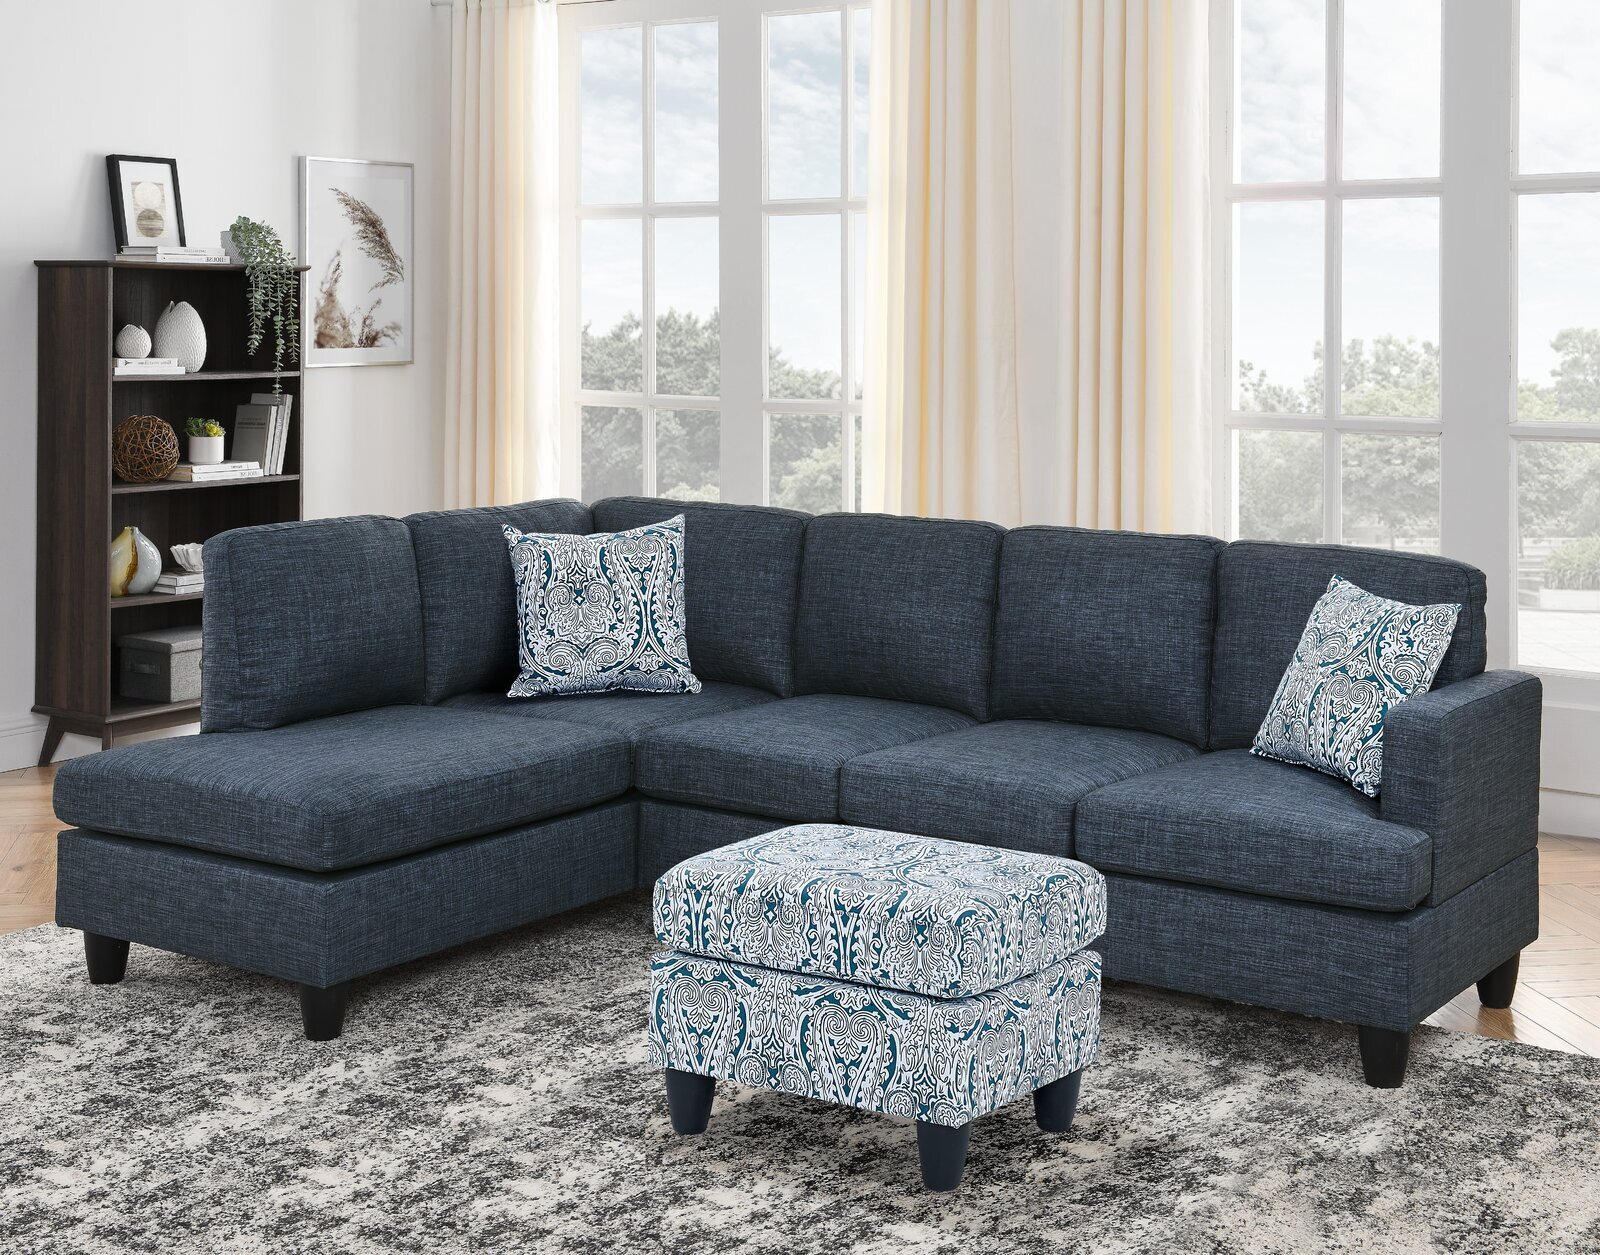 Sofa With Patterned Ottoman